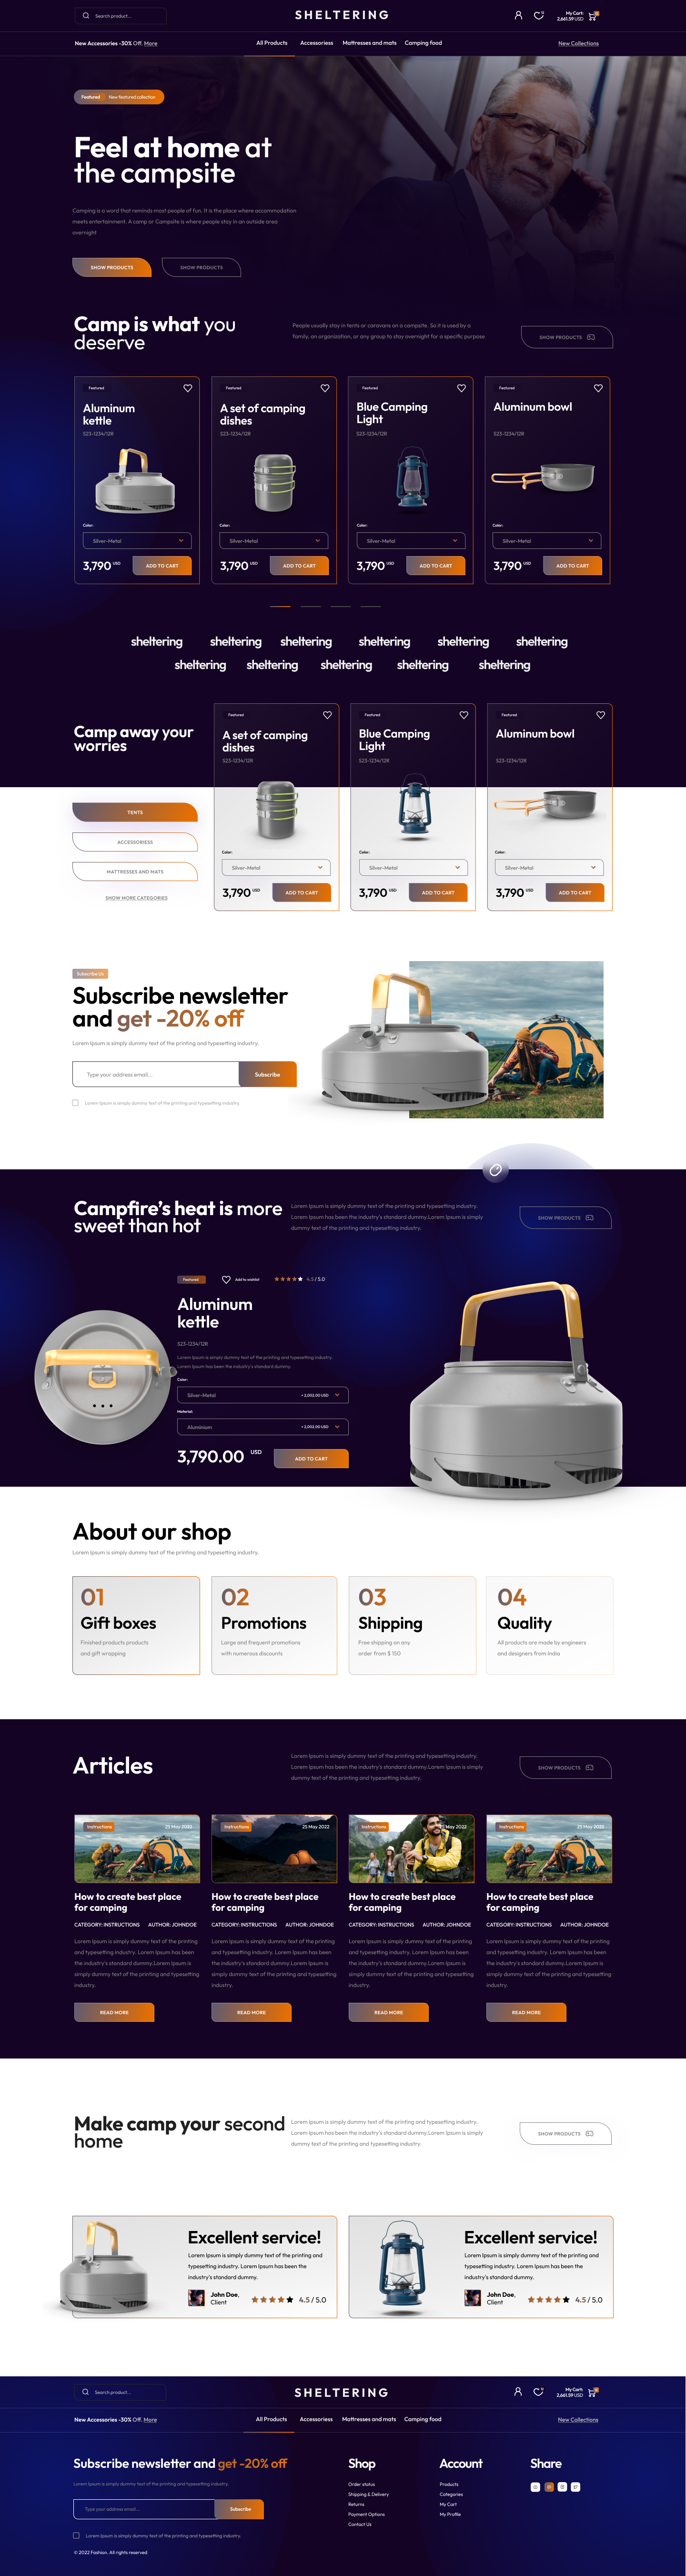 Sheltering Opencart Theme-WorkDo